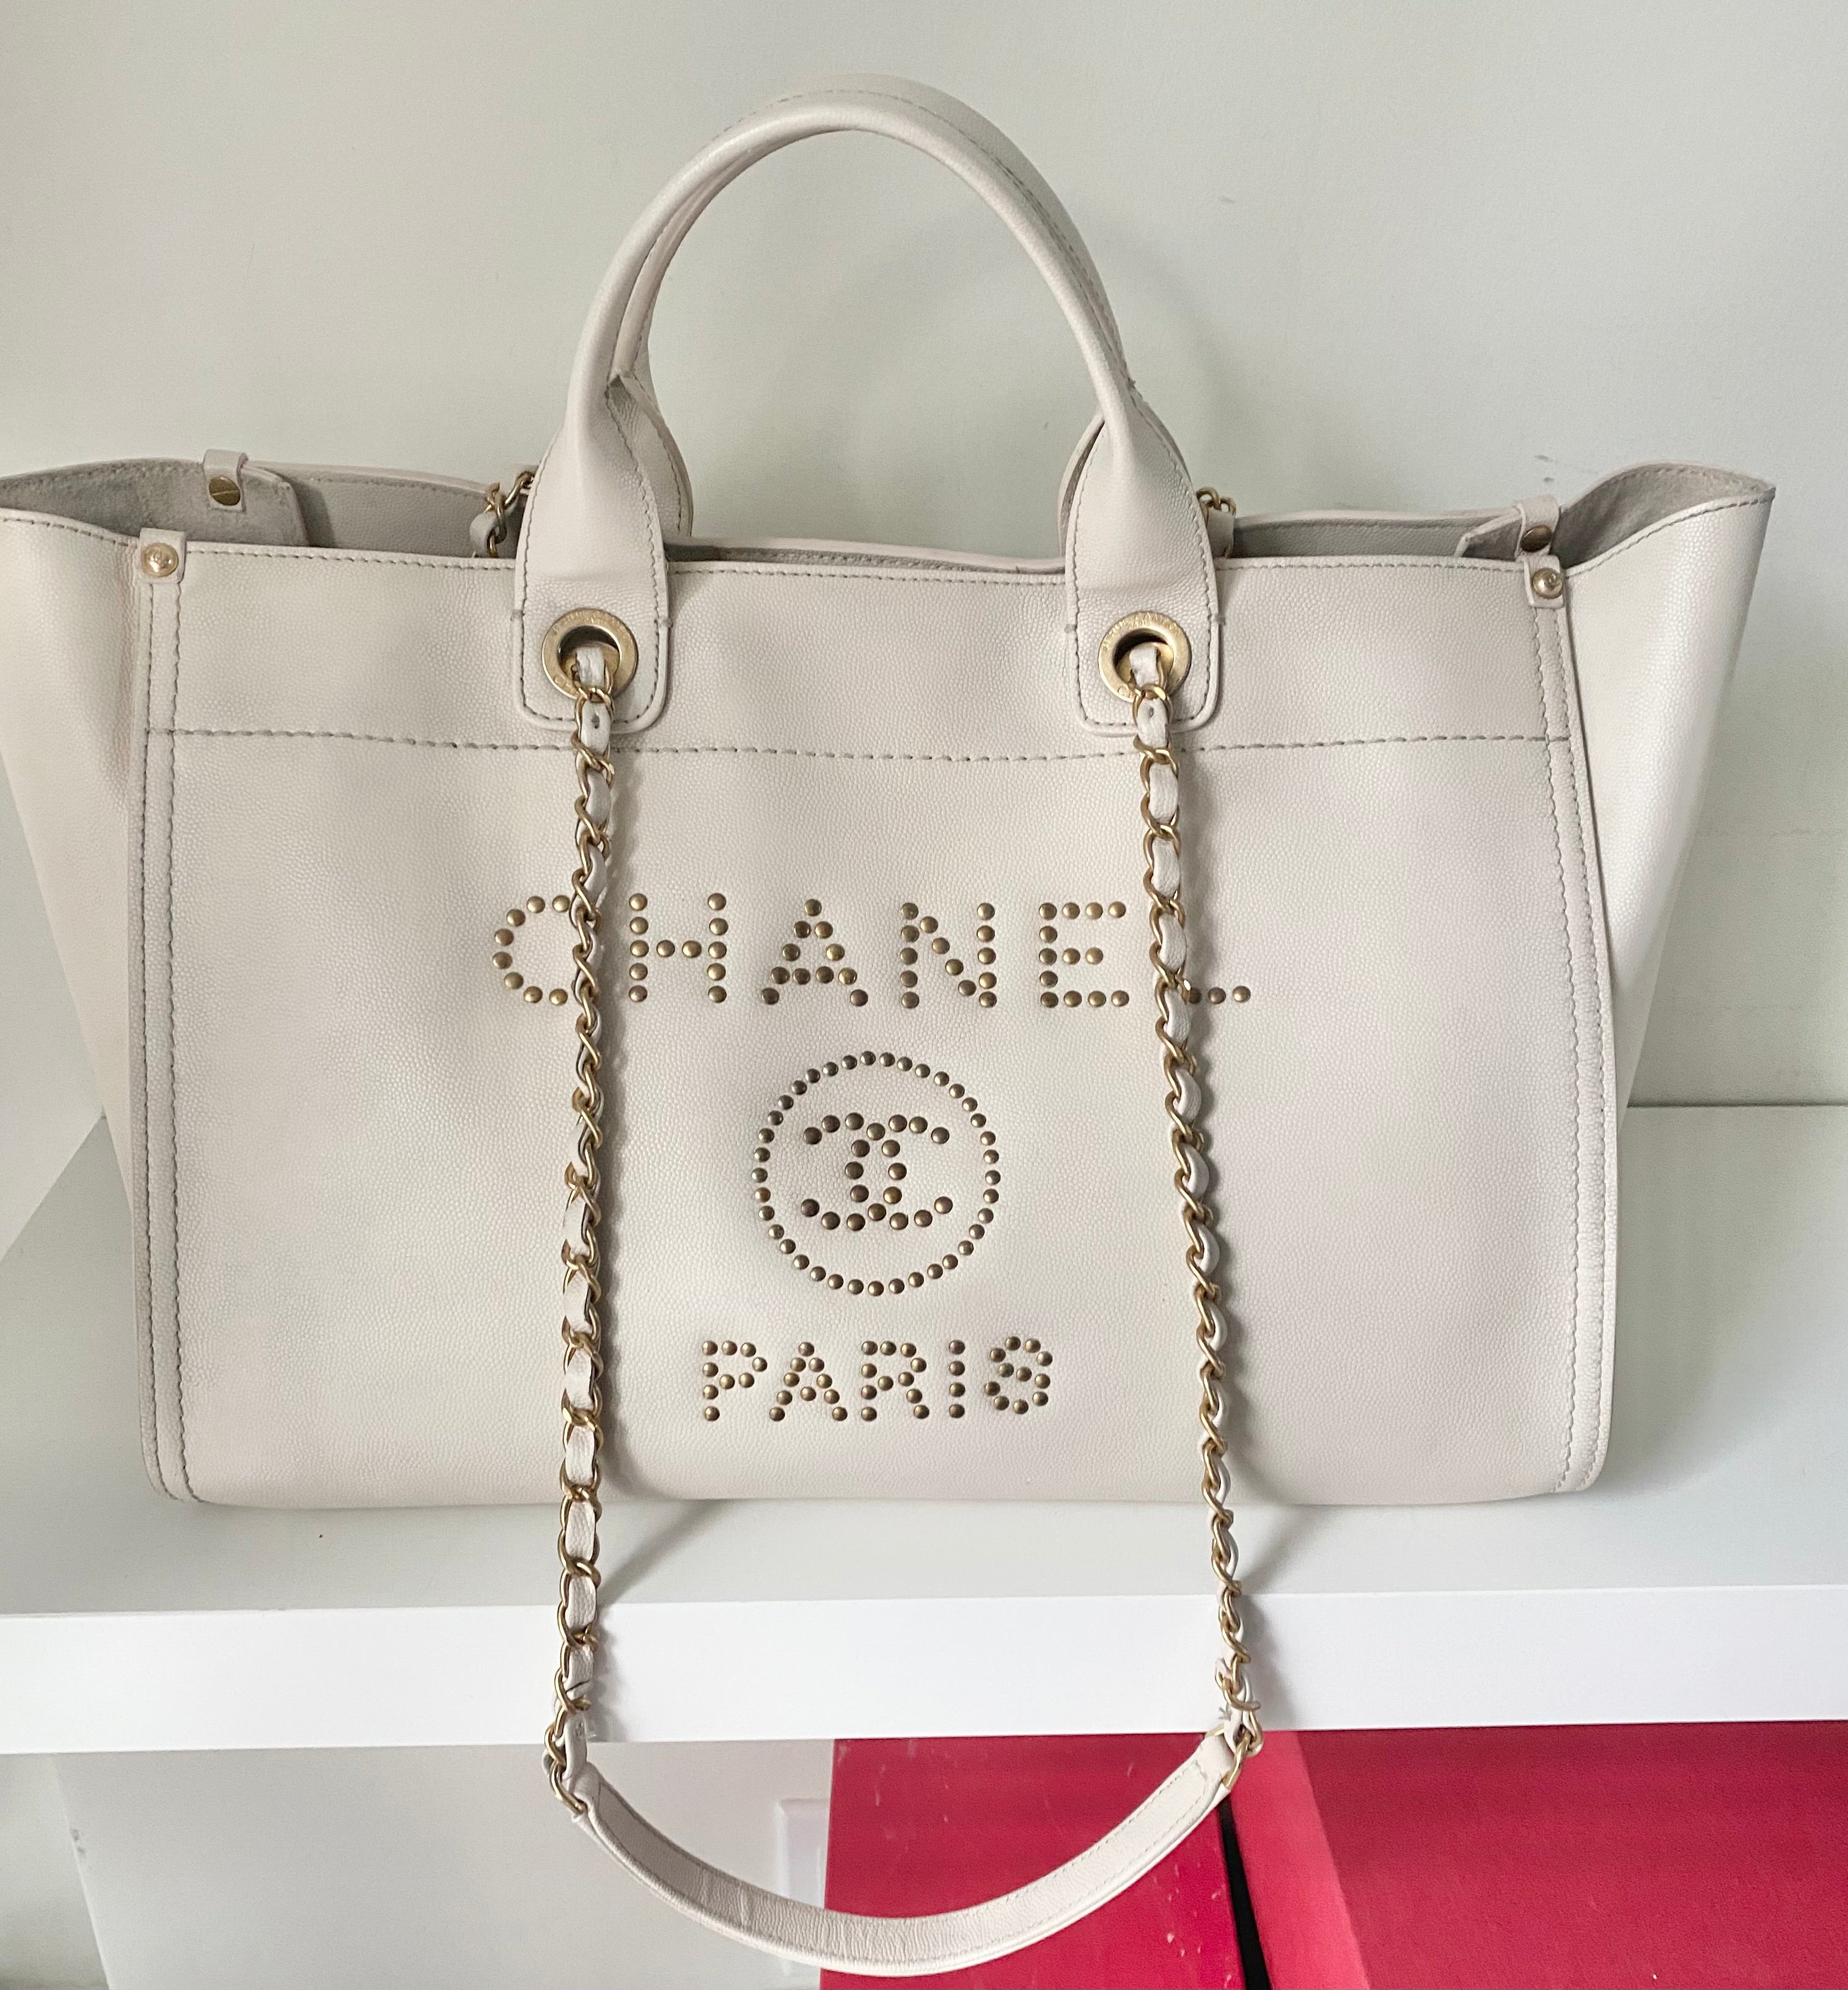 Chanel Cream Tweed and Leather Large Deauville Bag Chanel